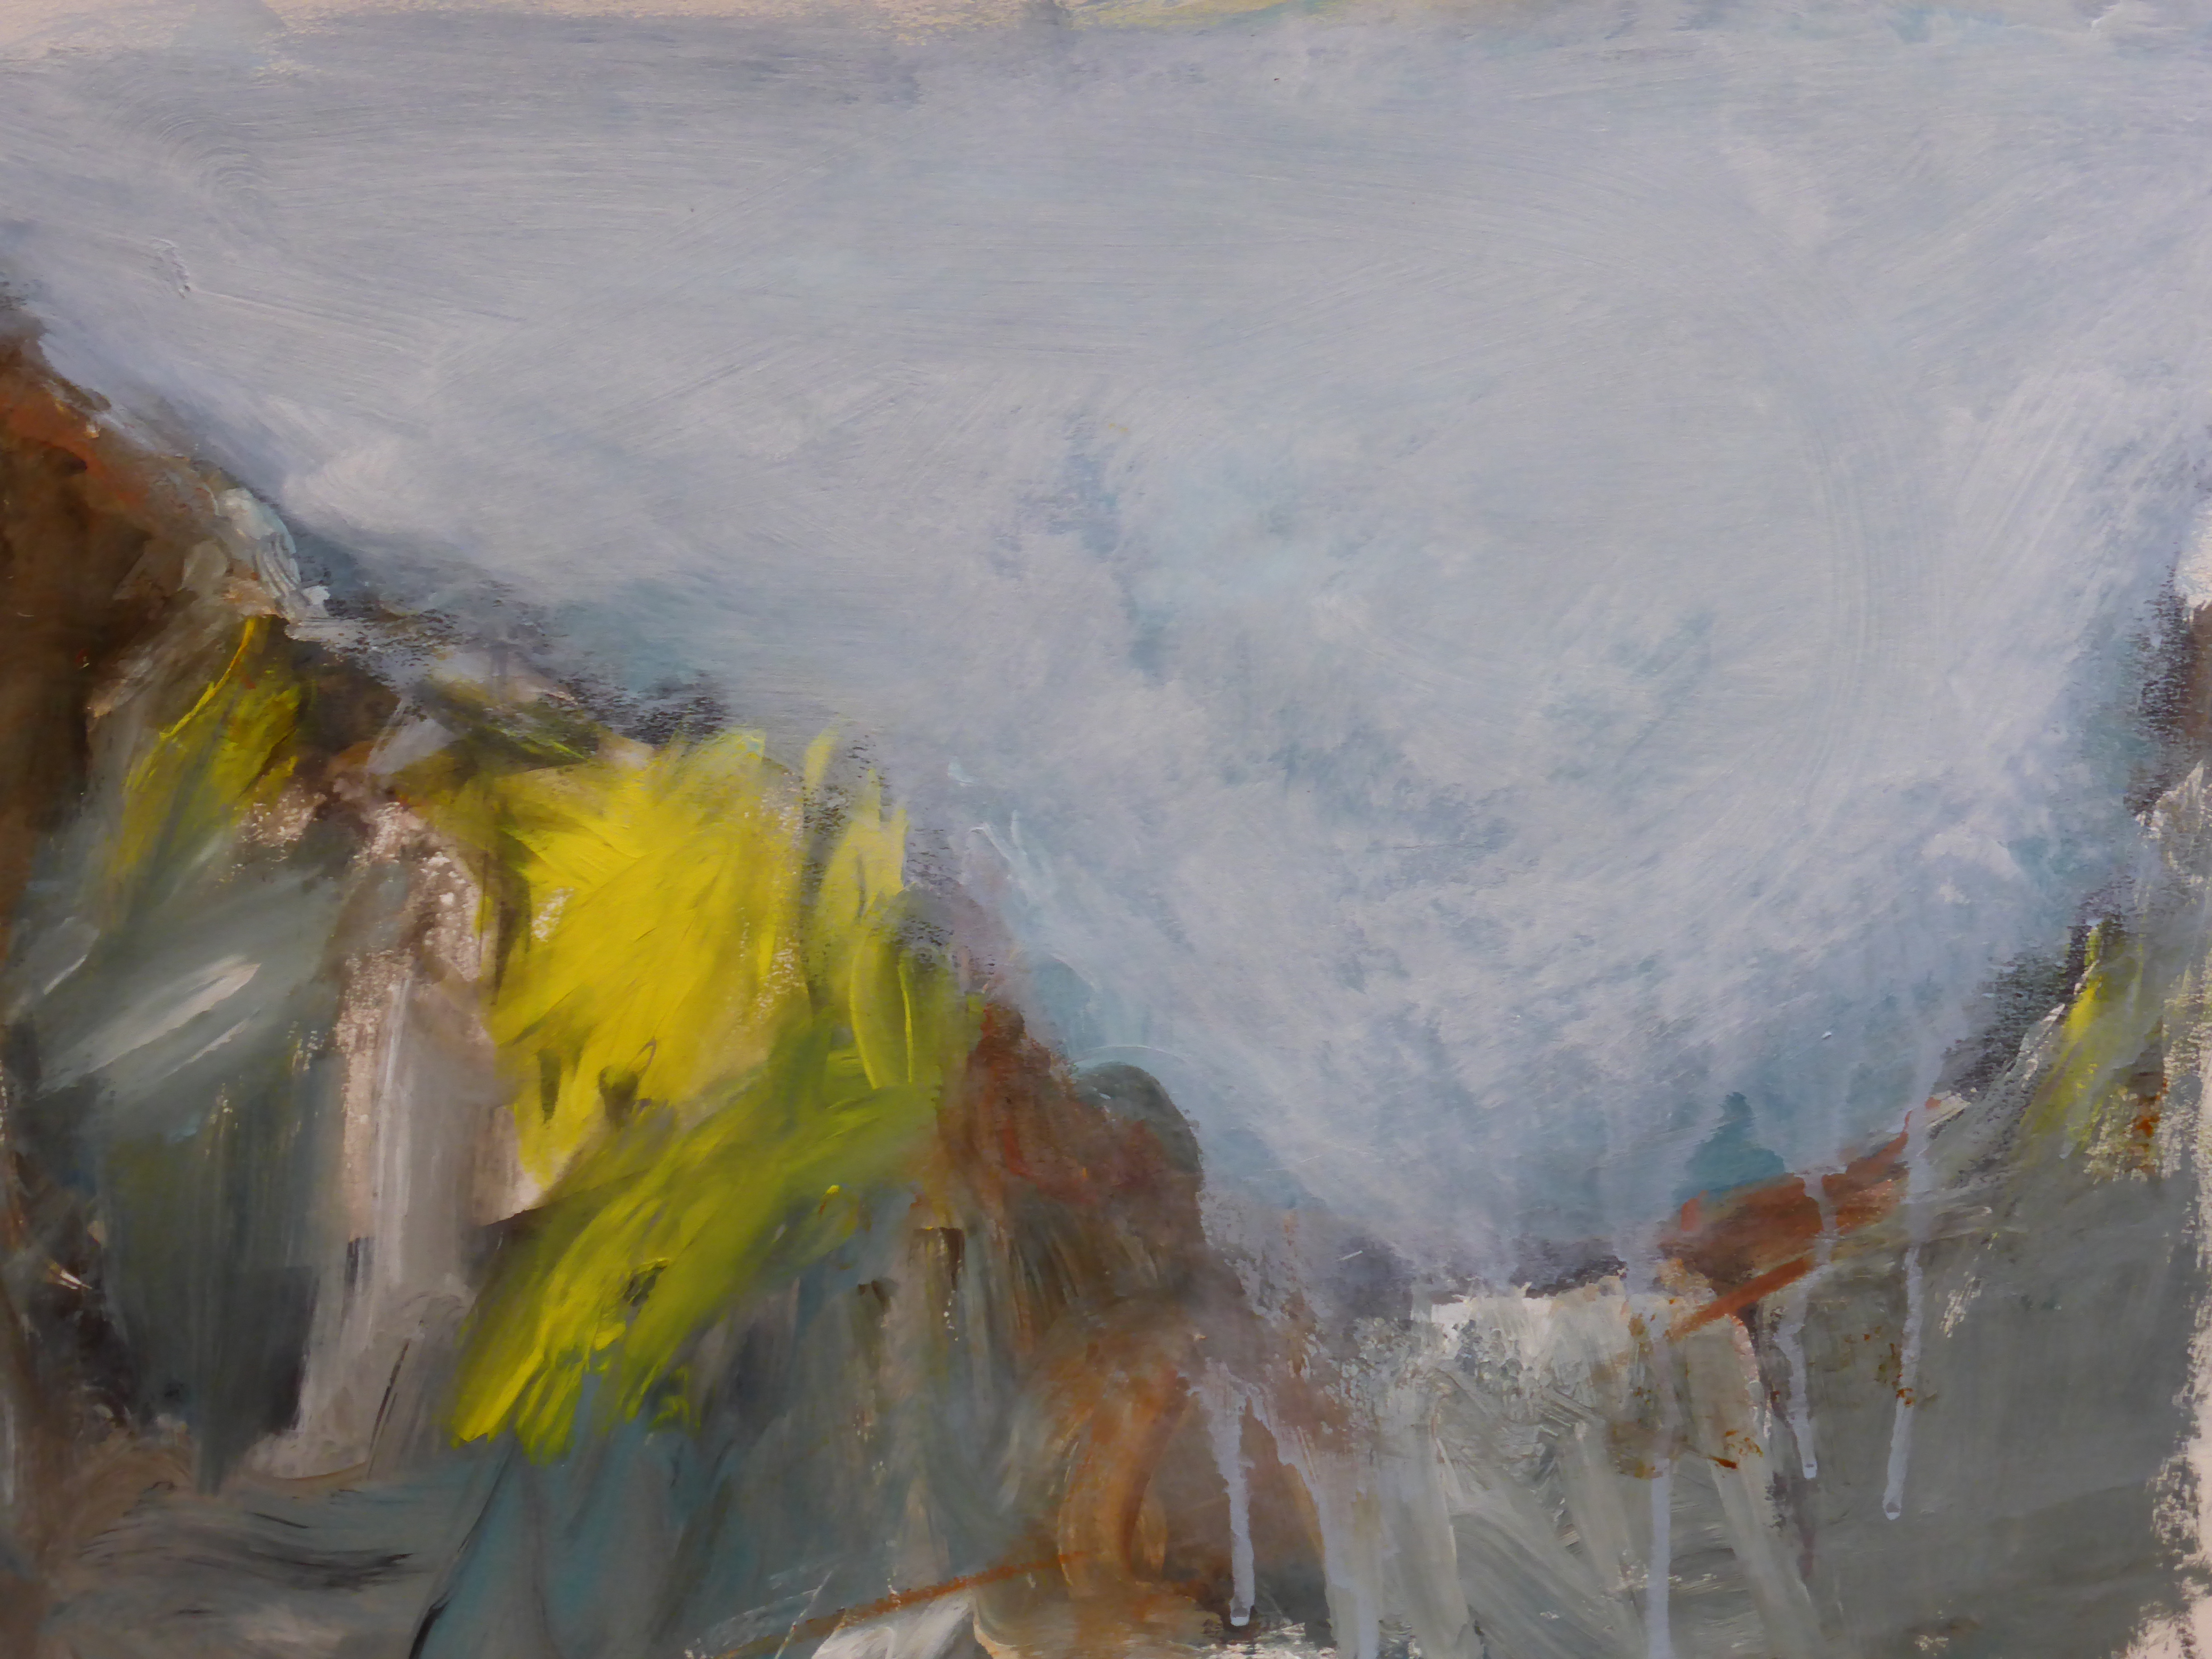 Overlooking Porthcurno with Gorse ii, Mixed Media on Paper, 37 x 50cm